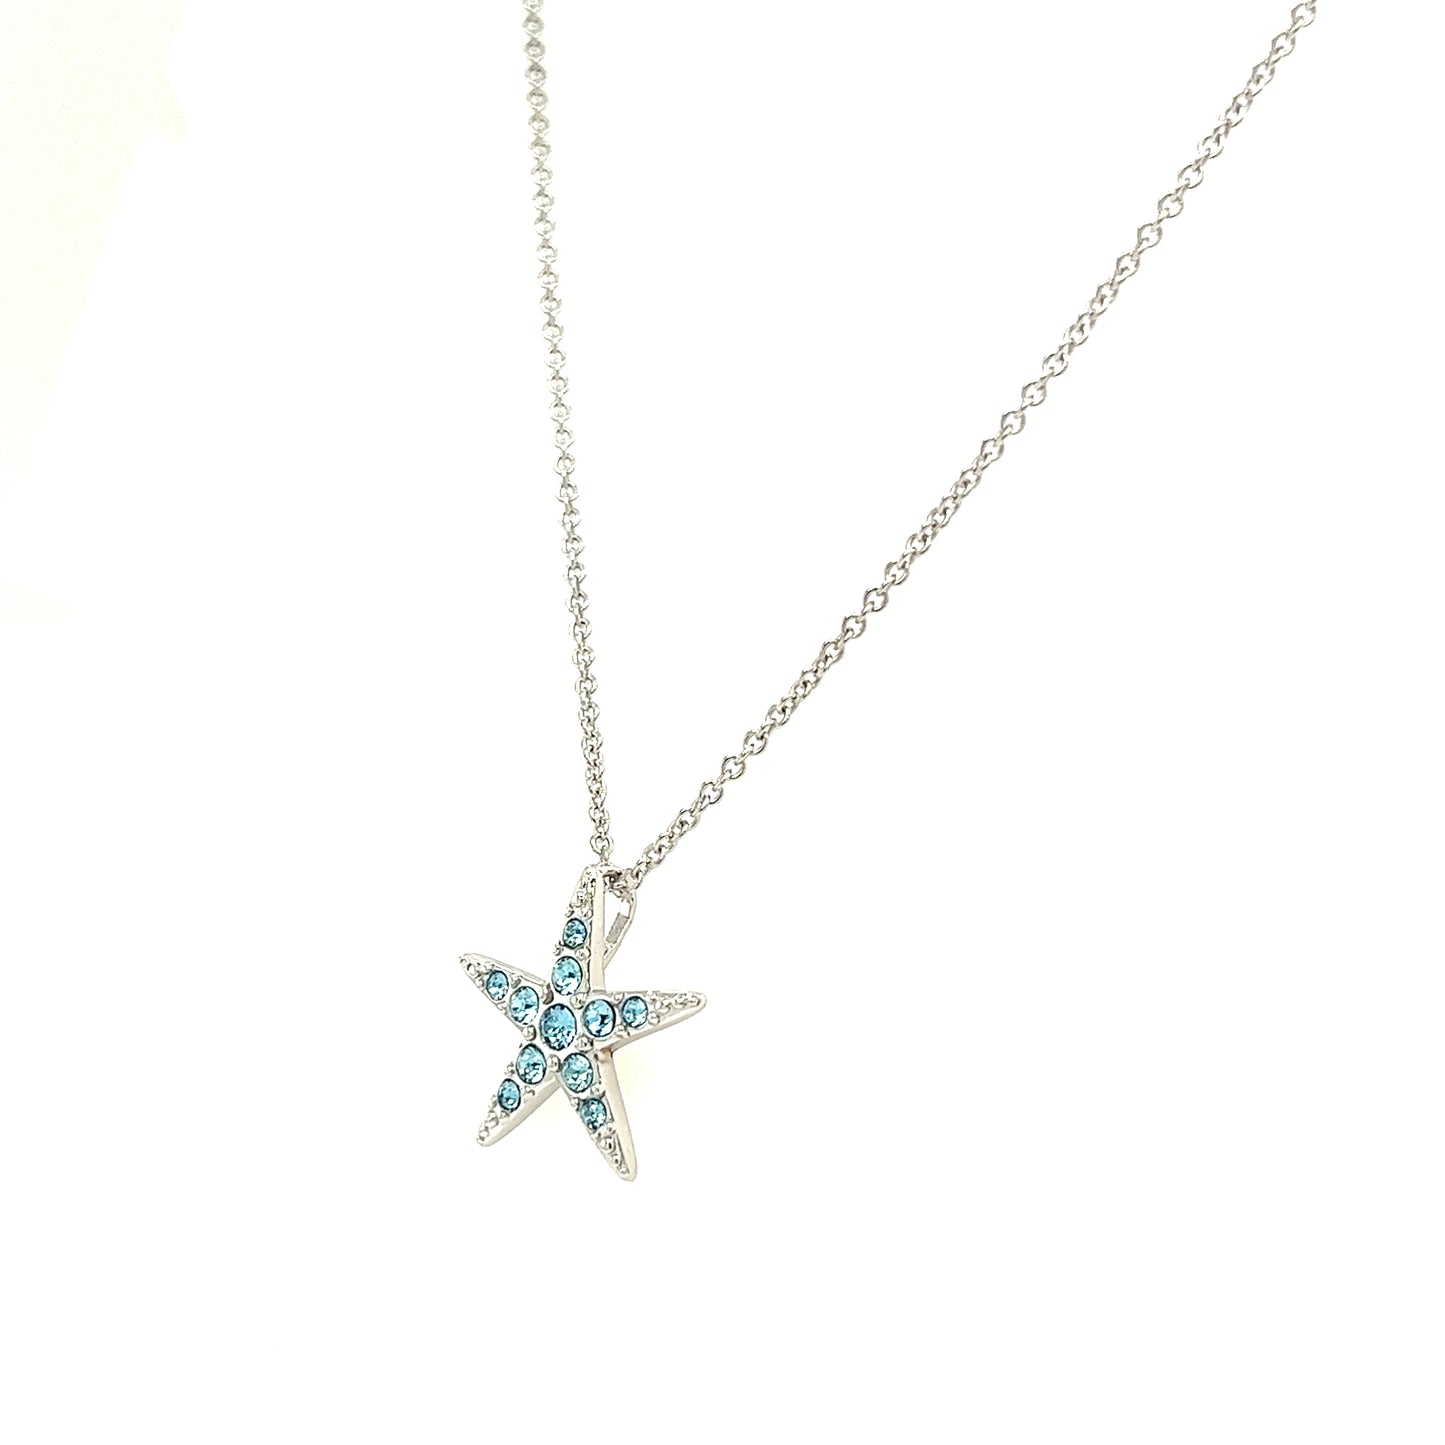 Starfish Necklace with Aqua Crystals in Sterling Silver Right Side View